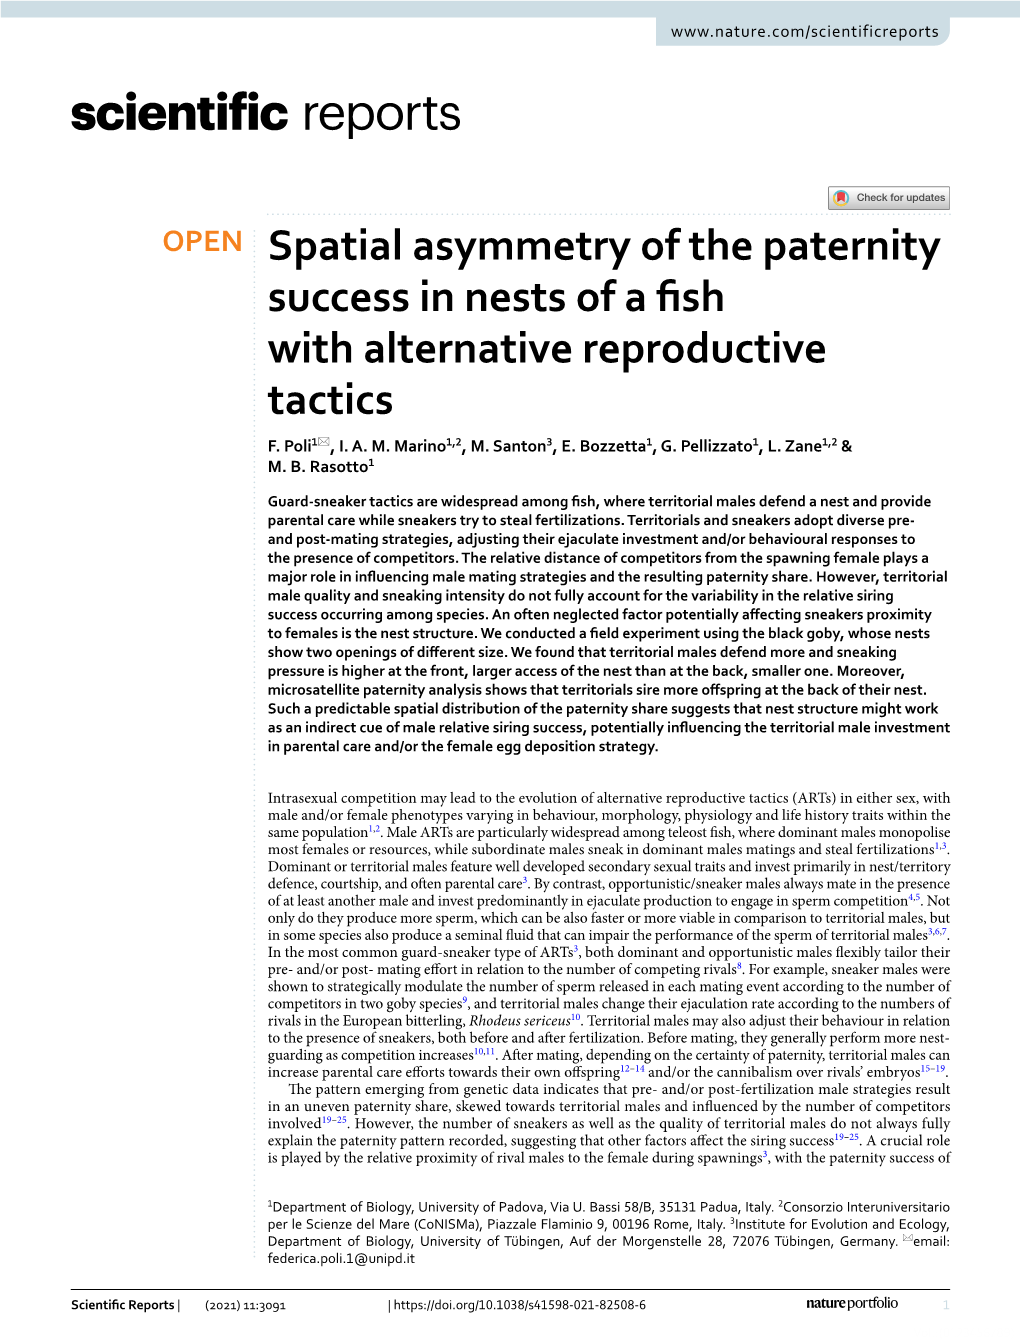 Spatial Asymmetry of the Paternity Success in Nests of a Fish With